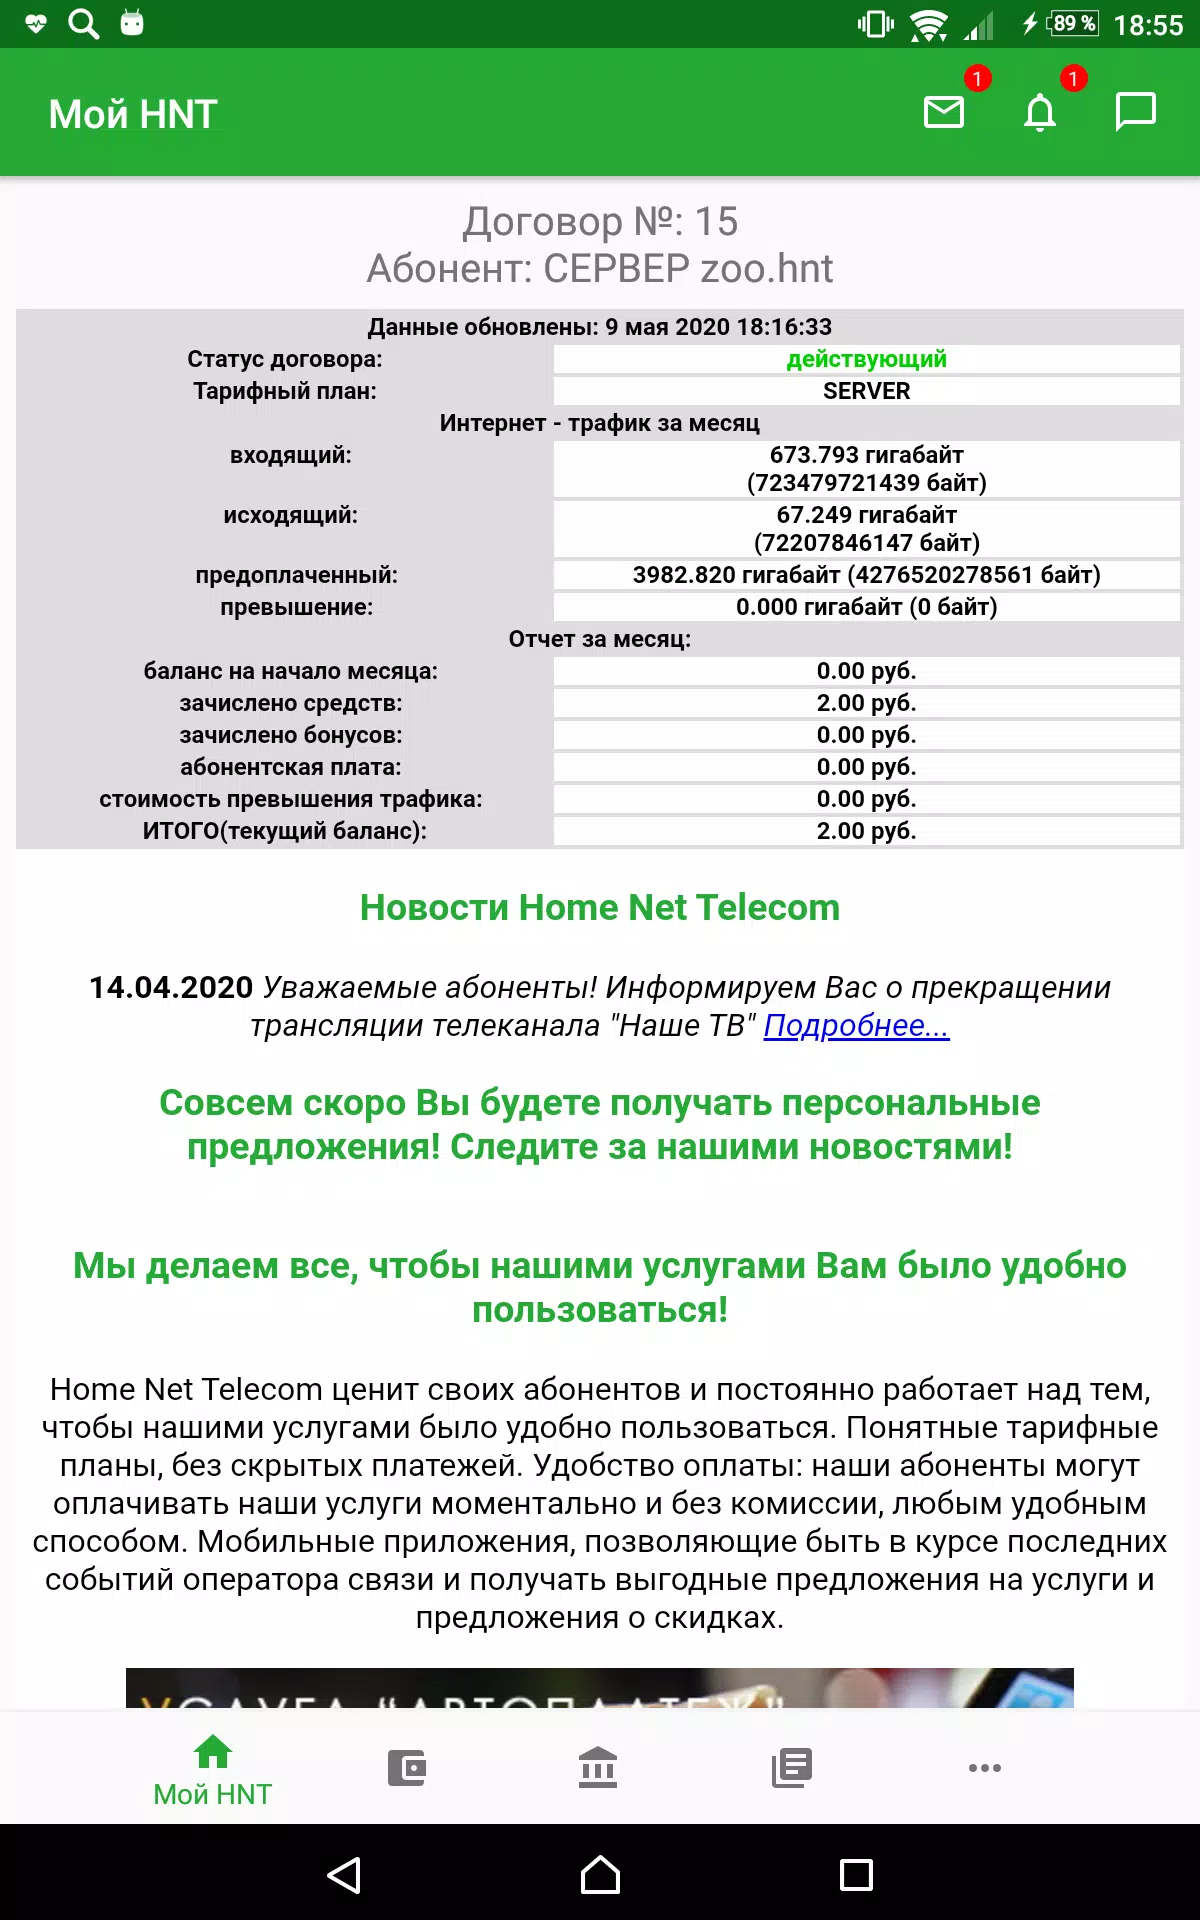 Home Net Telecom - HNT APK for Android Download